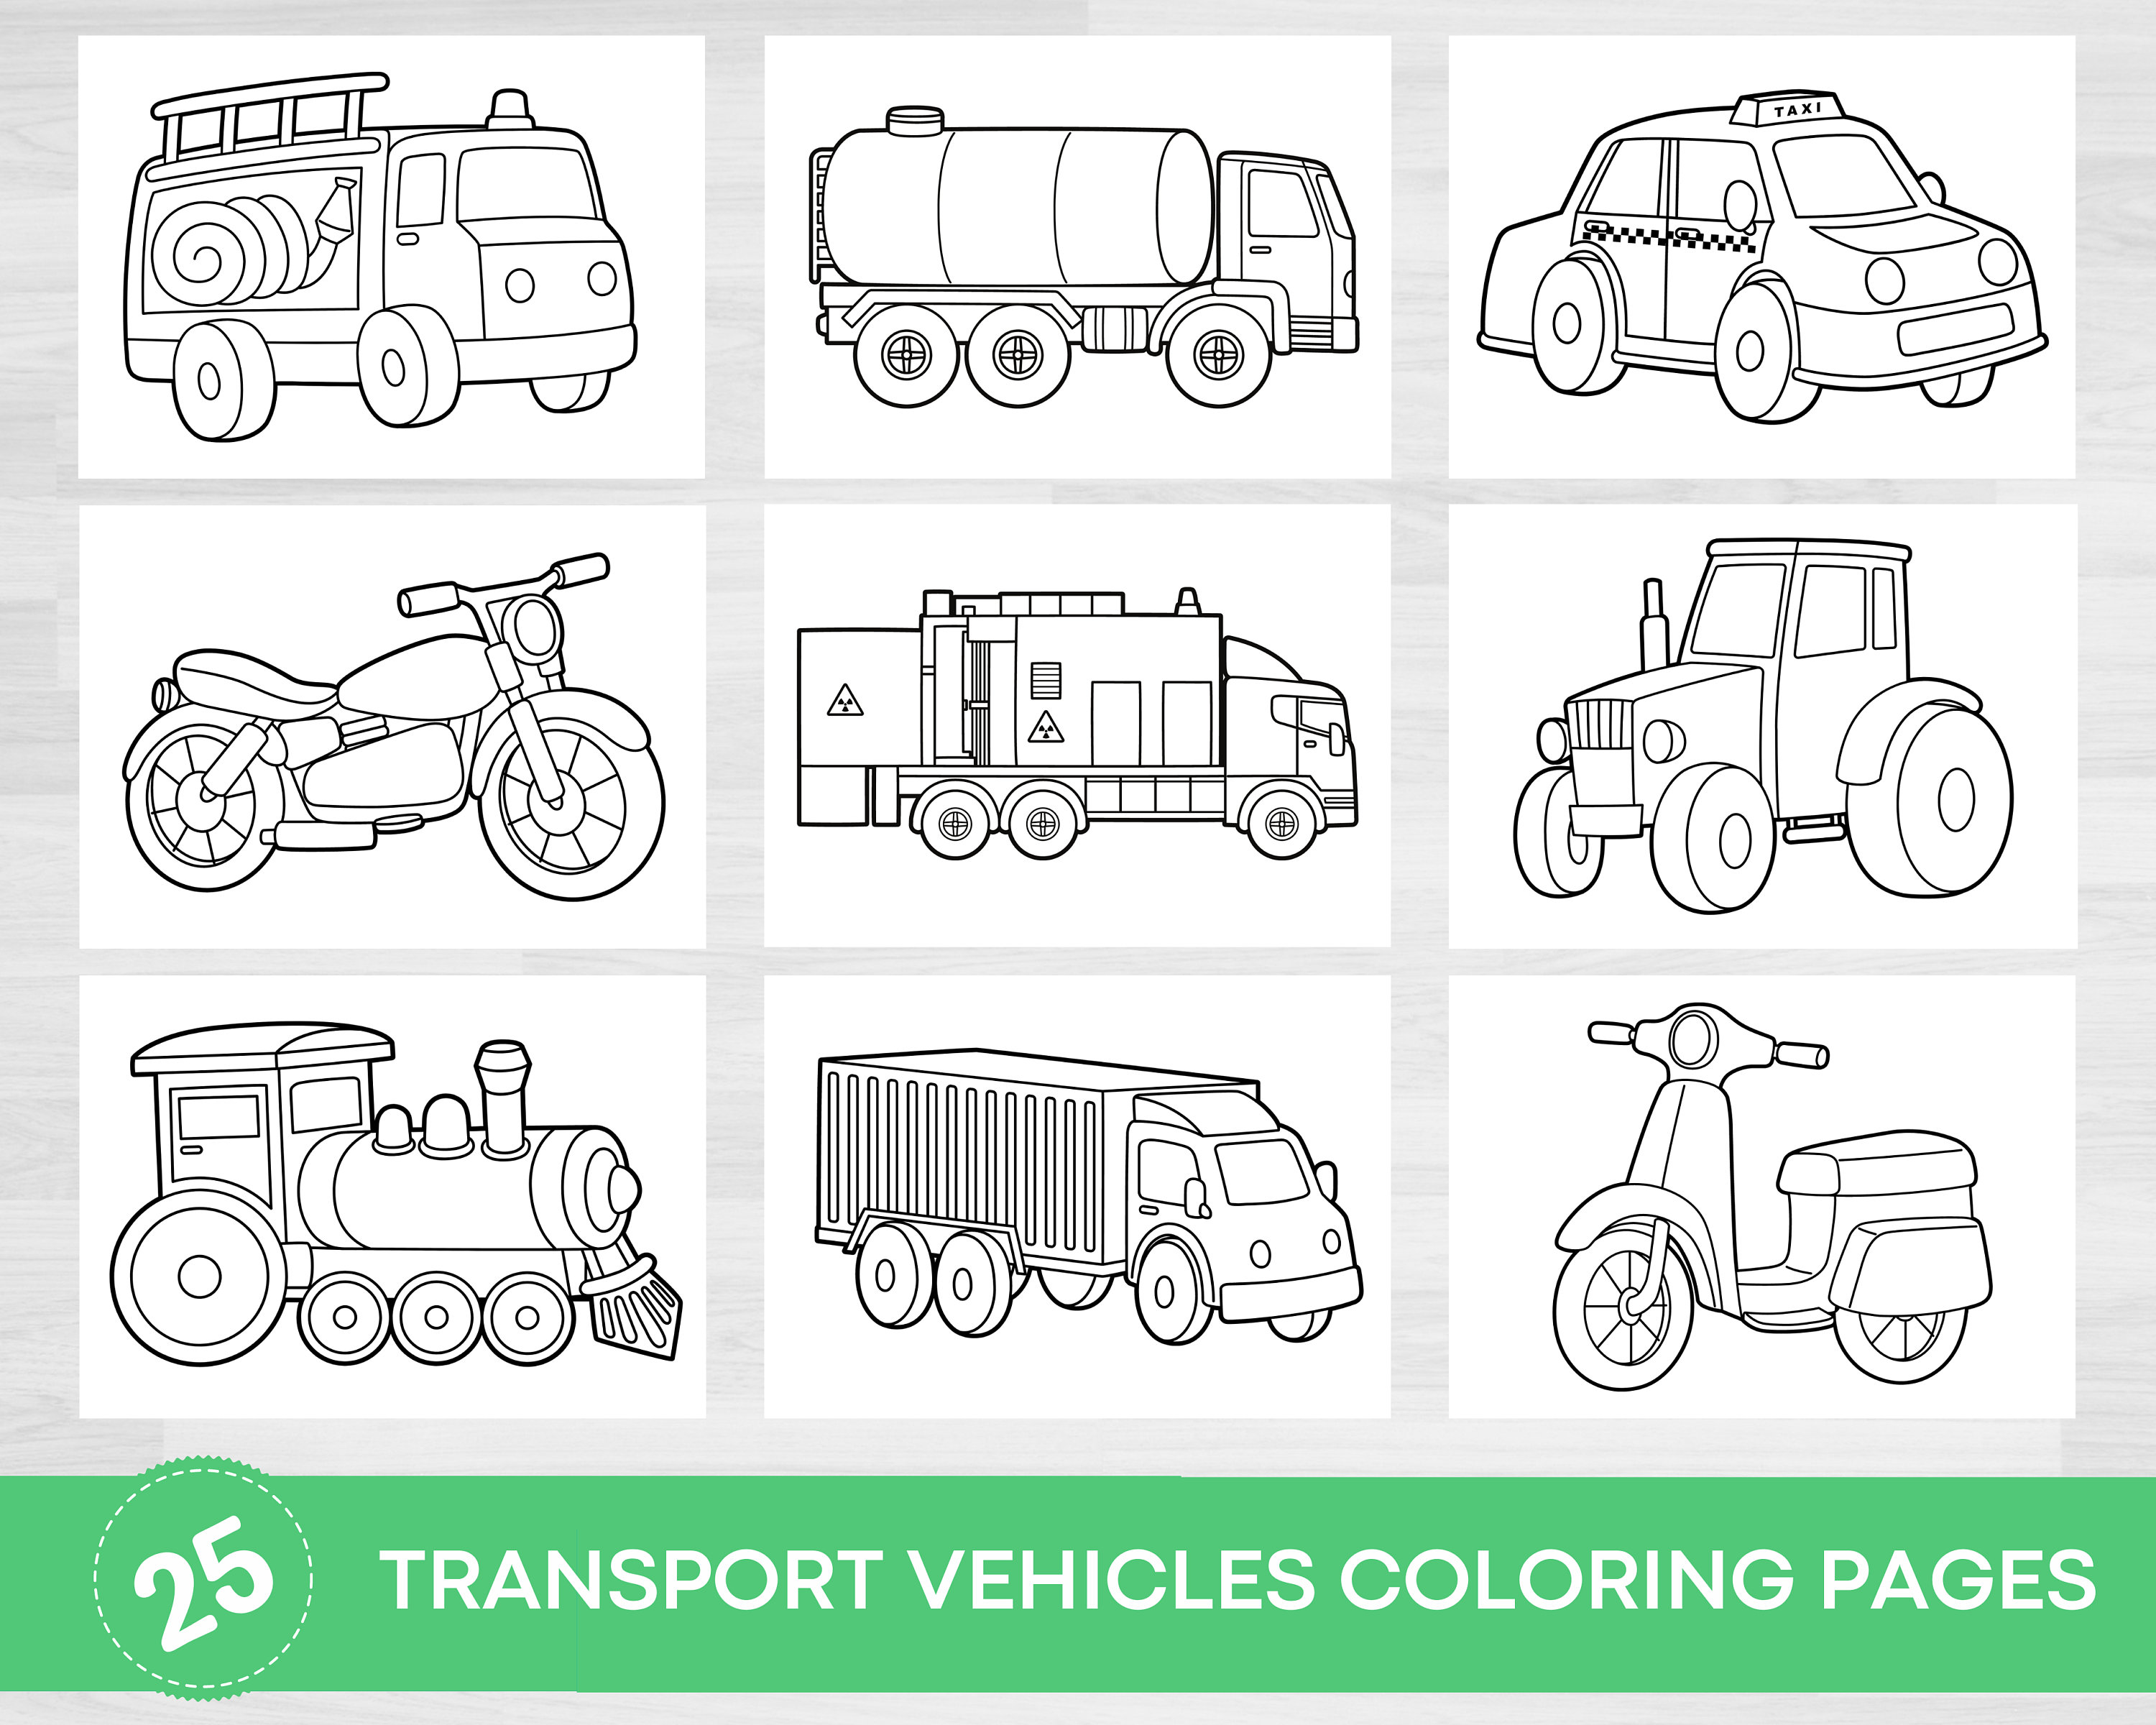 Transport vehicles coloring pages transport vehicle coloring activities coloring printables car trip activities coloring for kids instant download